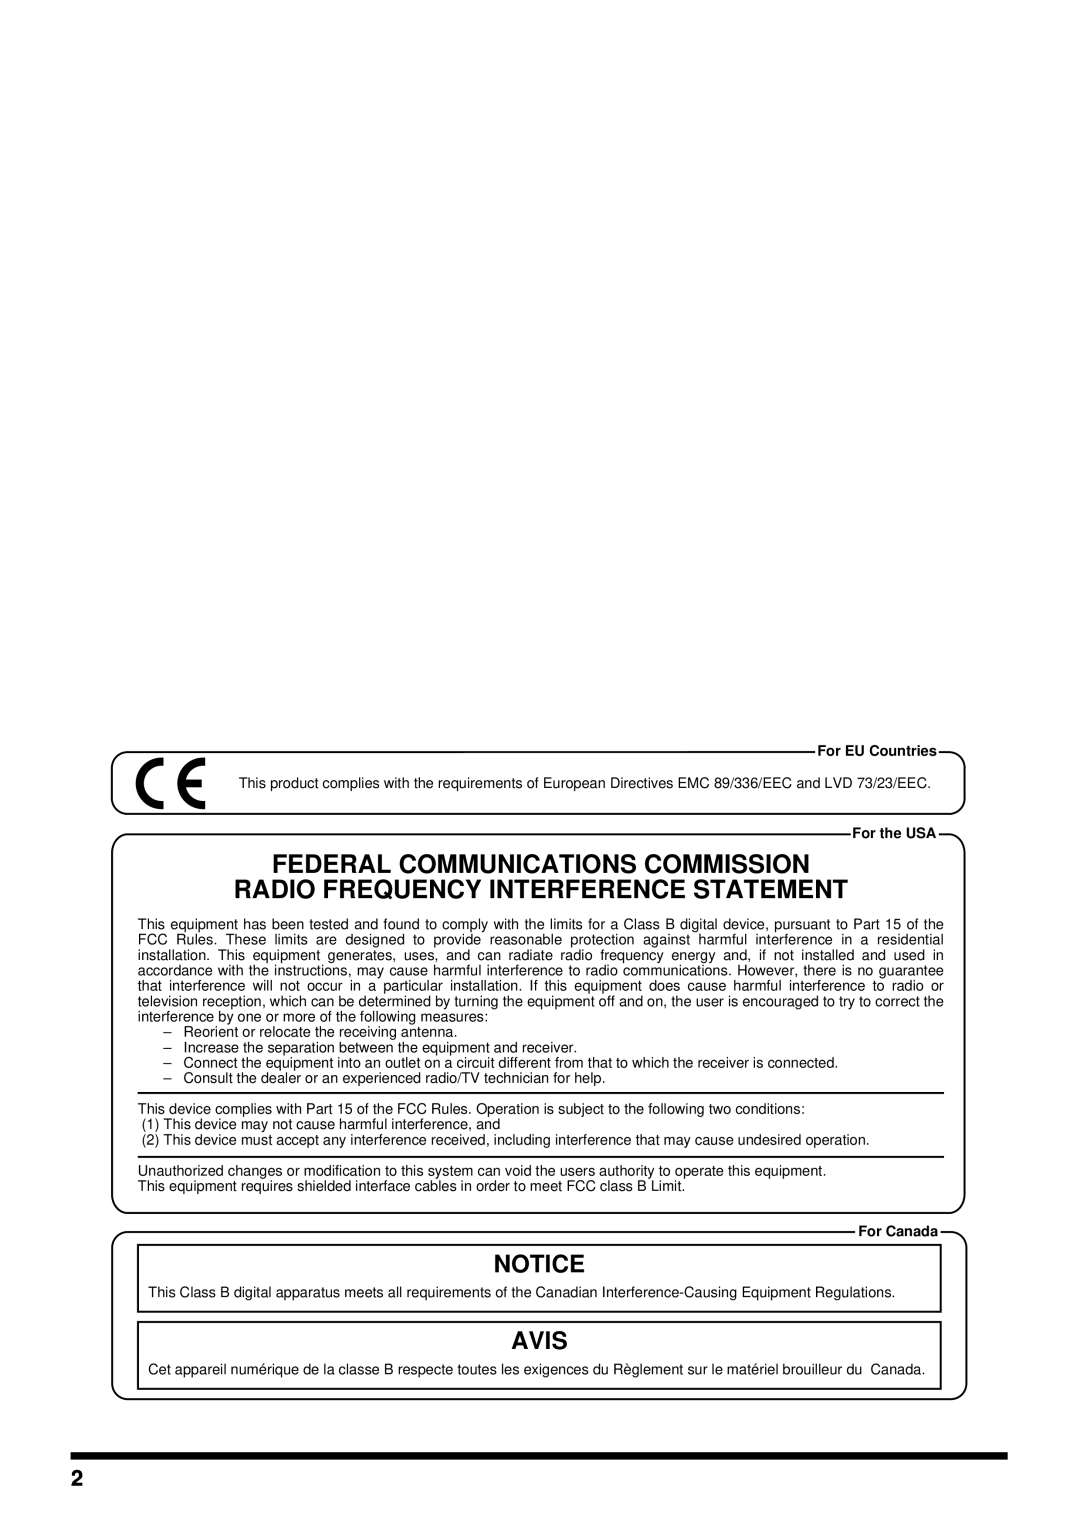 Roland DS-30A Federal Communications Commission, Radio Frequency Interference Statement, Avis, For EU Countries 